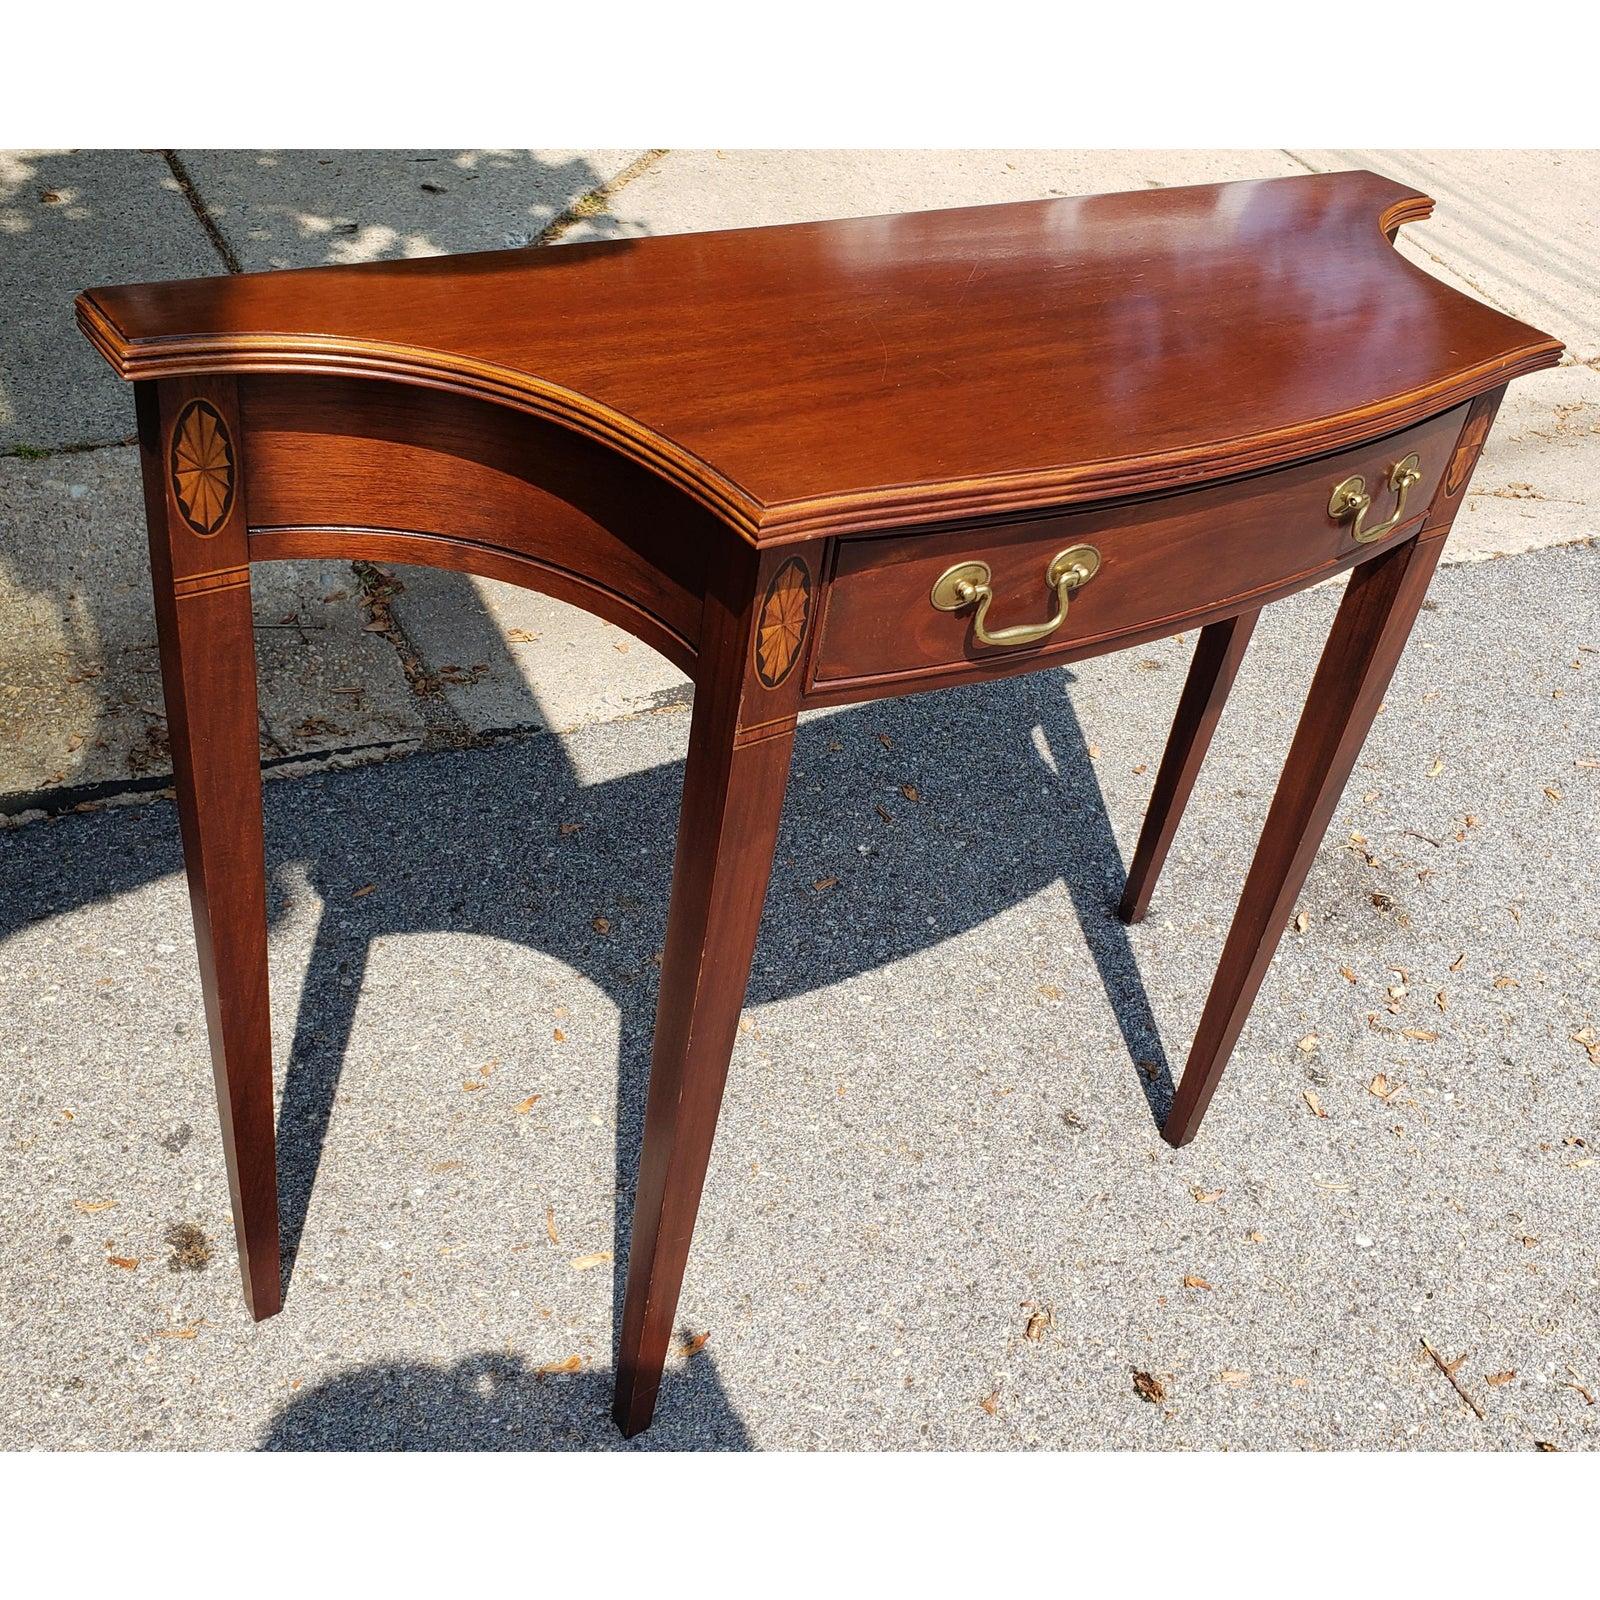 A beautifully contoured, highly versatile piece of solid mahogany console or hall table made by Hammary. This lovely piece features a striking mahogany grain and real wood inlay. It measures 42” x 14”, stands 32” tall, and is in excellent condition.